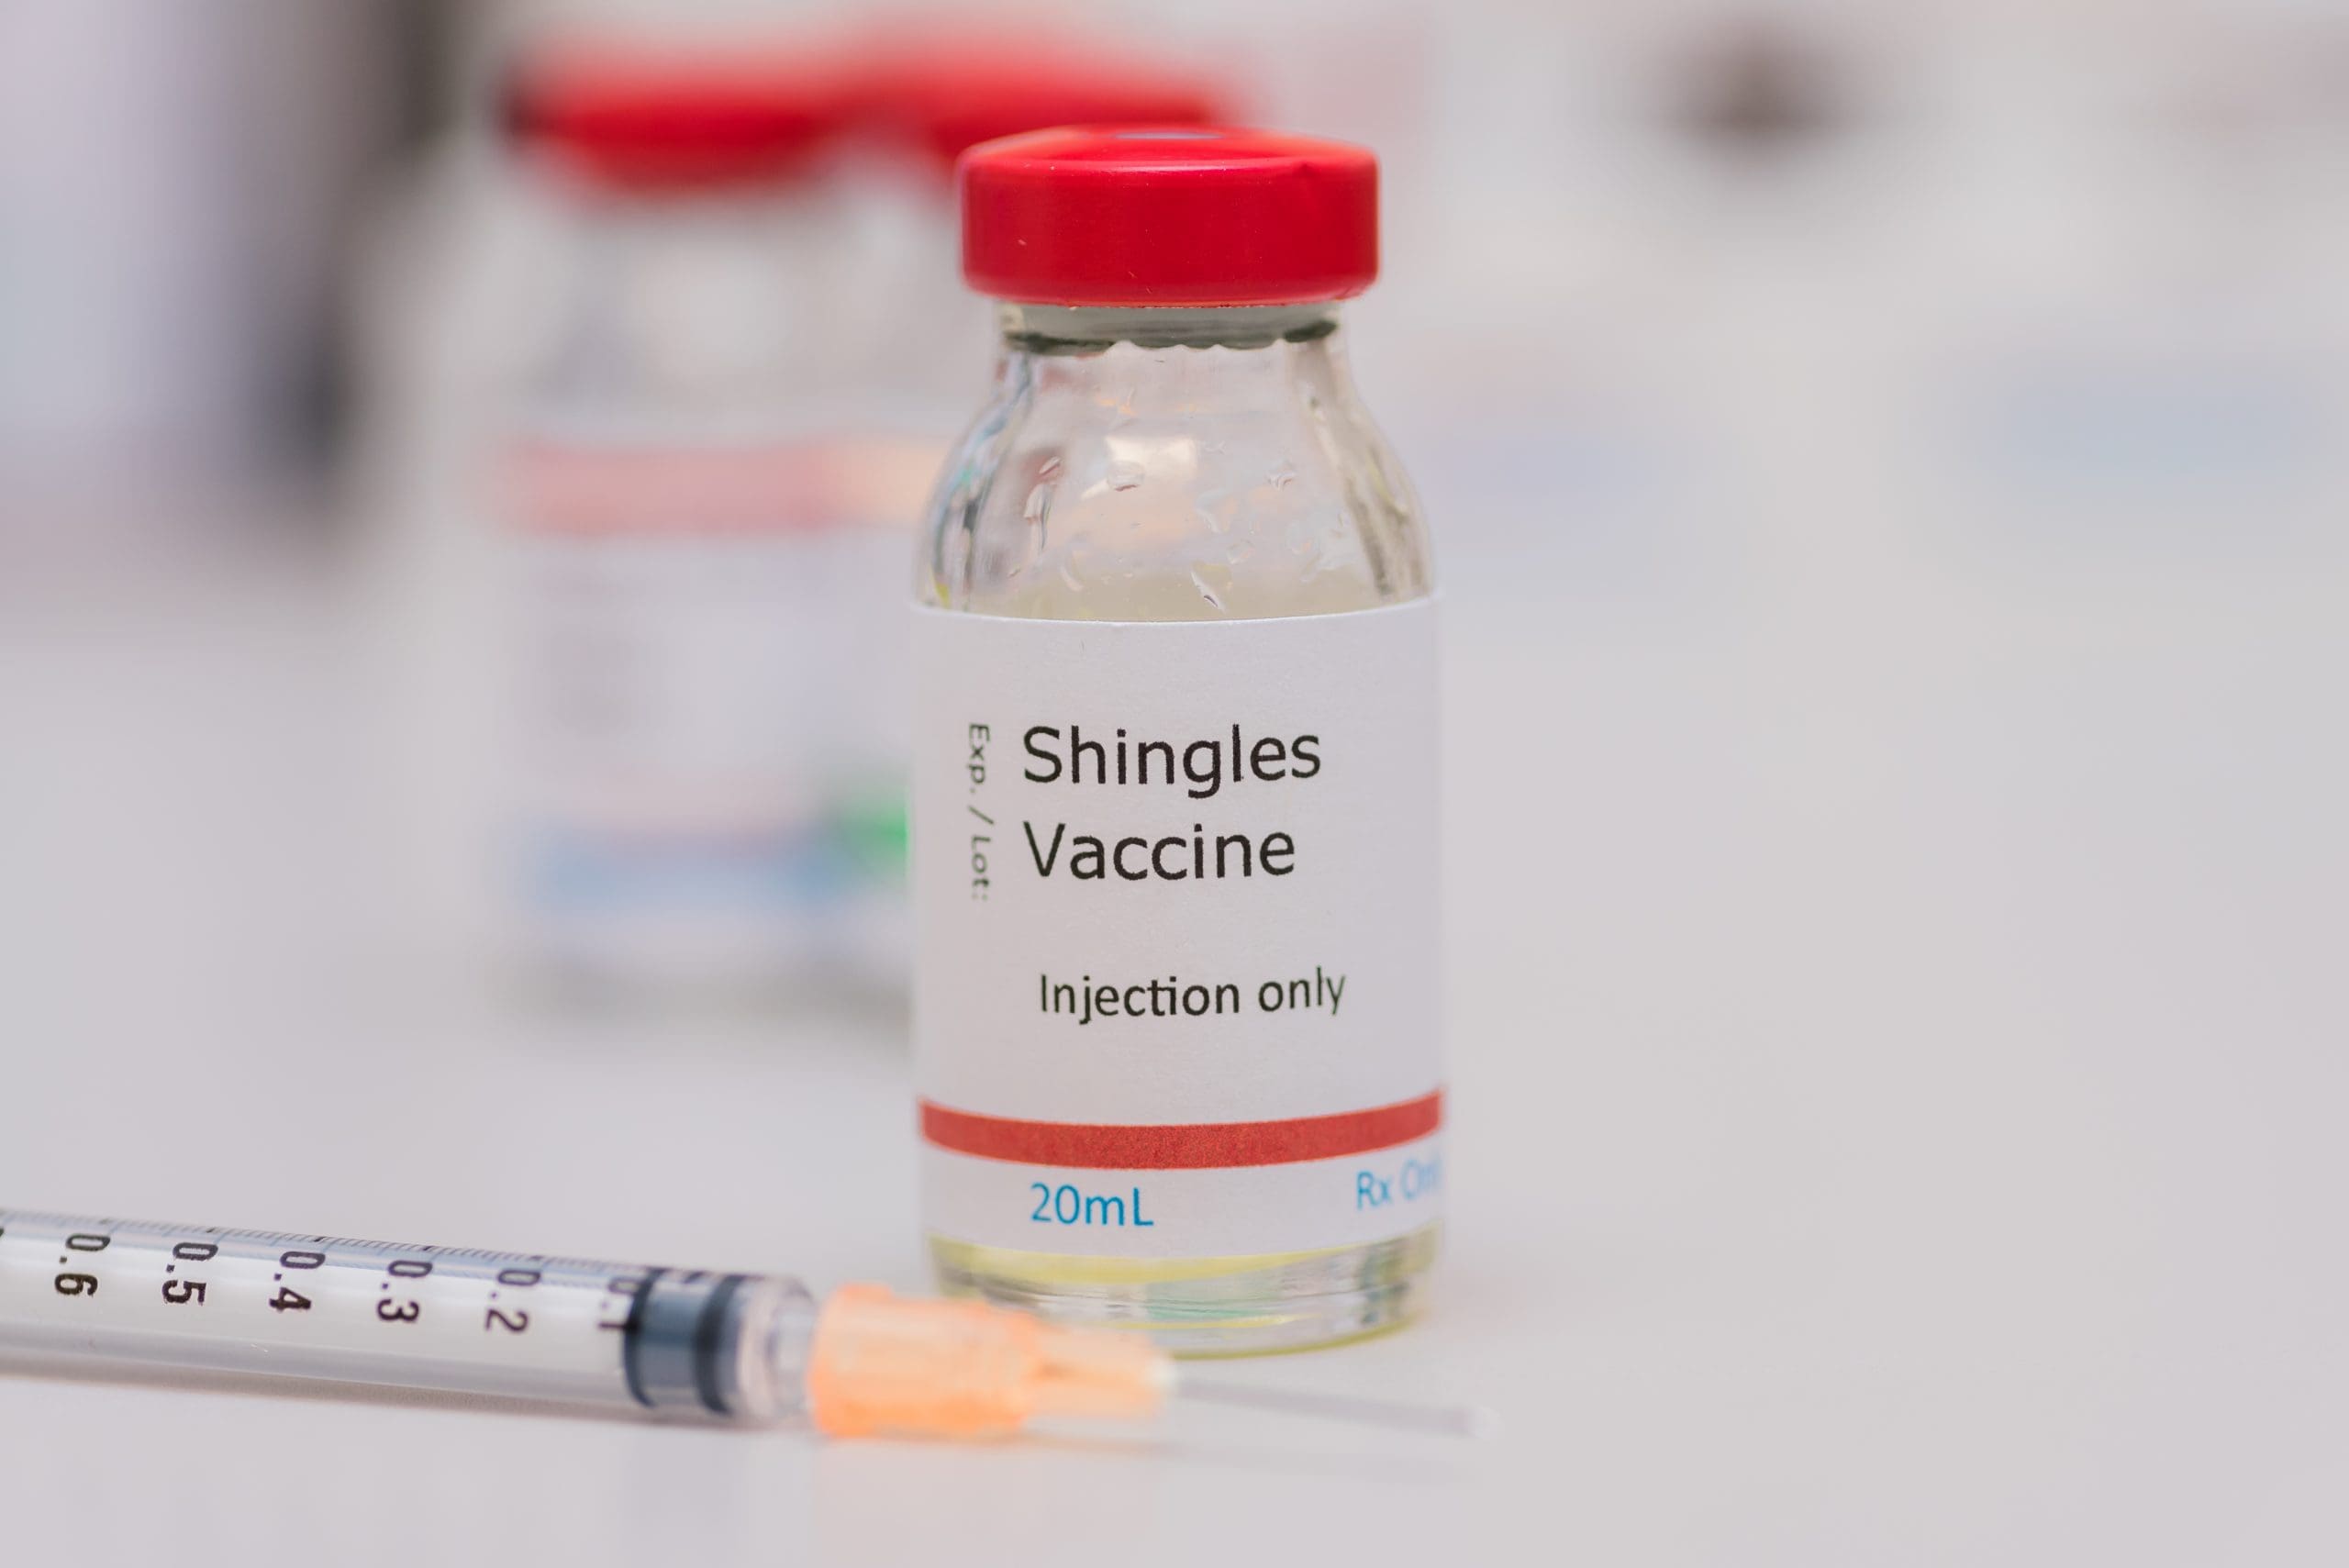 Shingles vaccine concept with syringe in foreground, vaccination vial on counter with additional vials in background